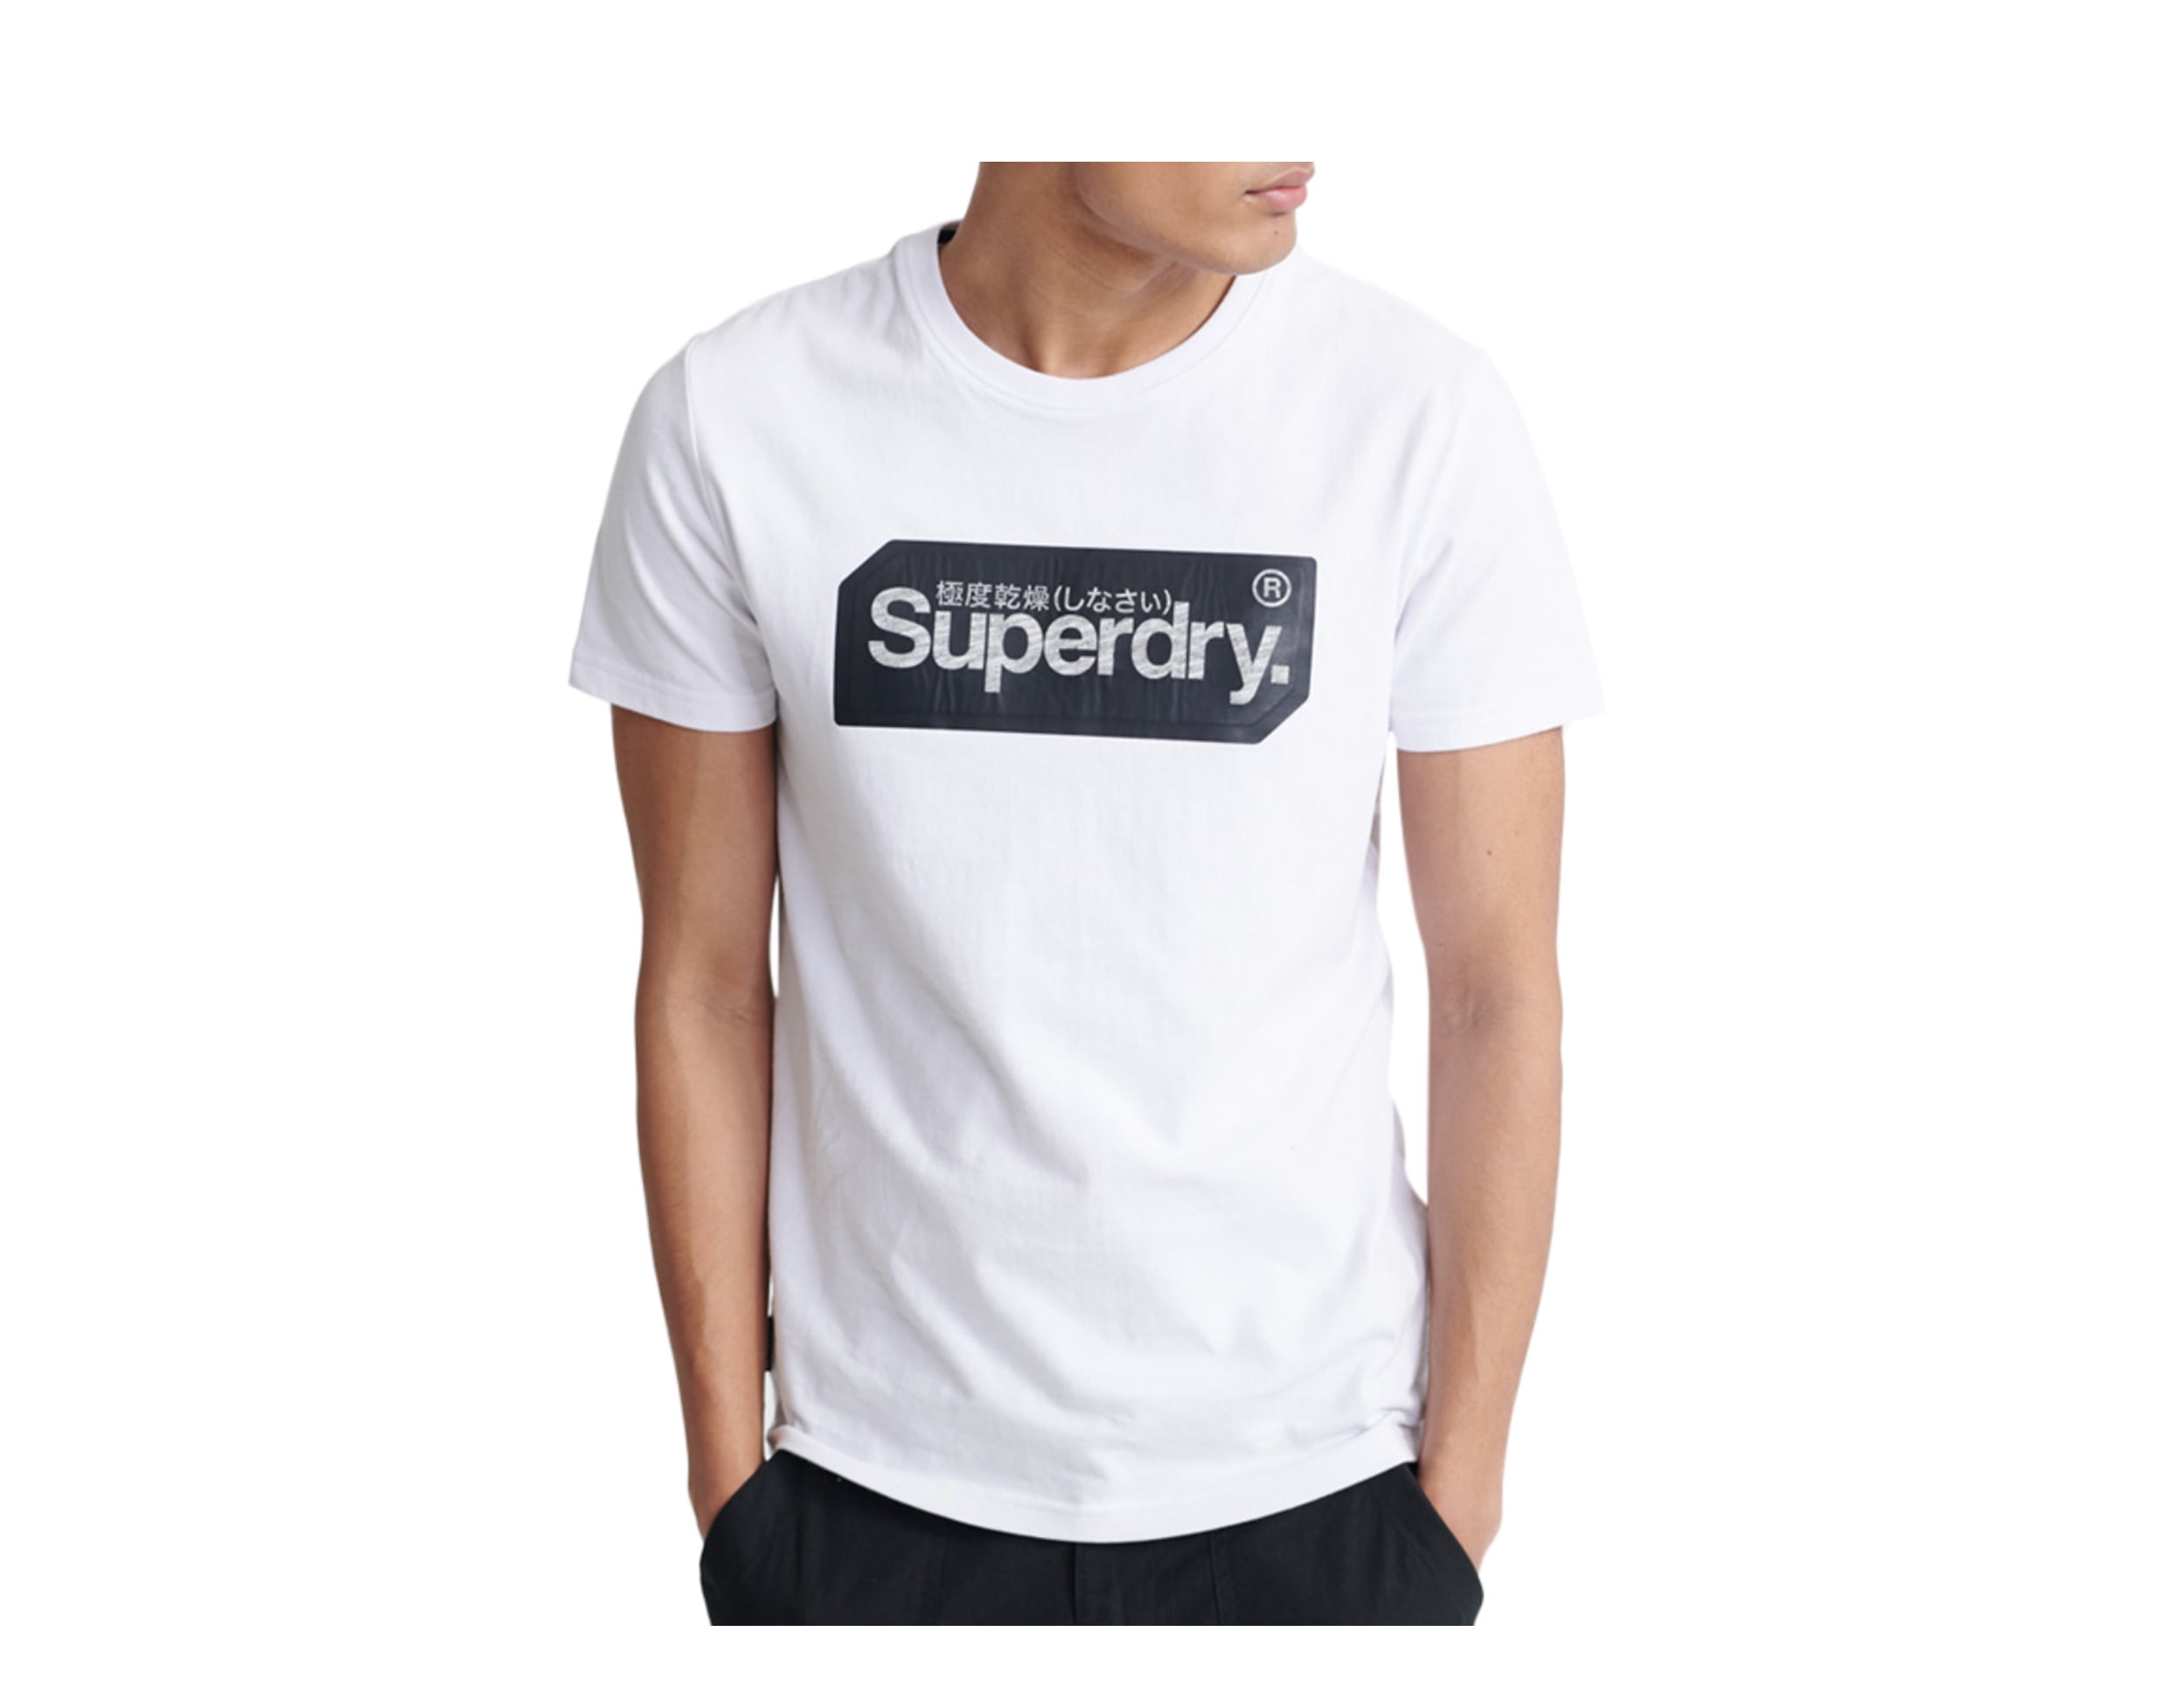 Superdry Projects :: Photos, videos, logos, illustrations and